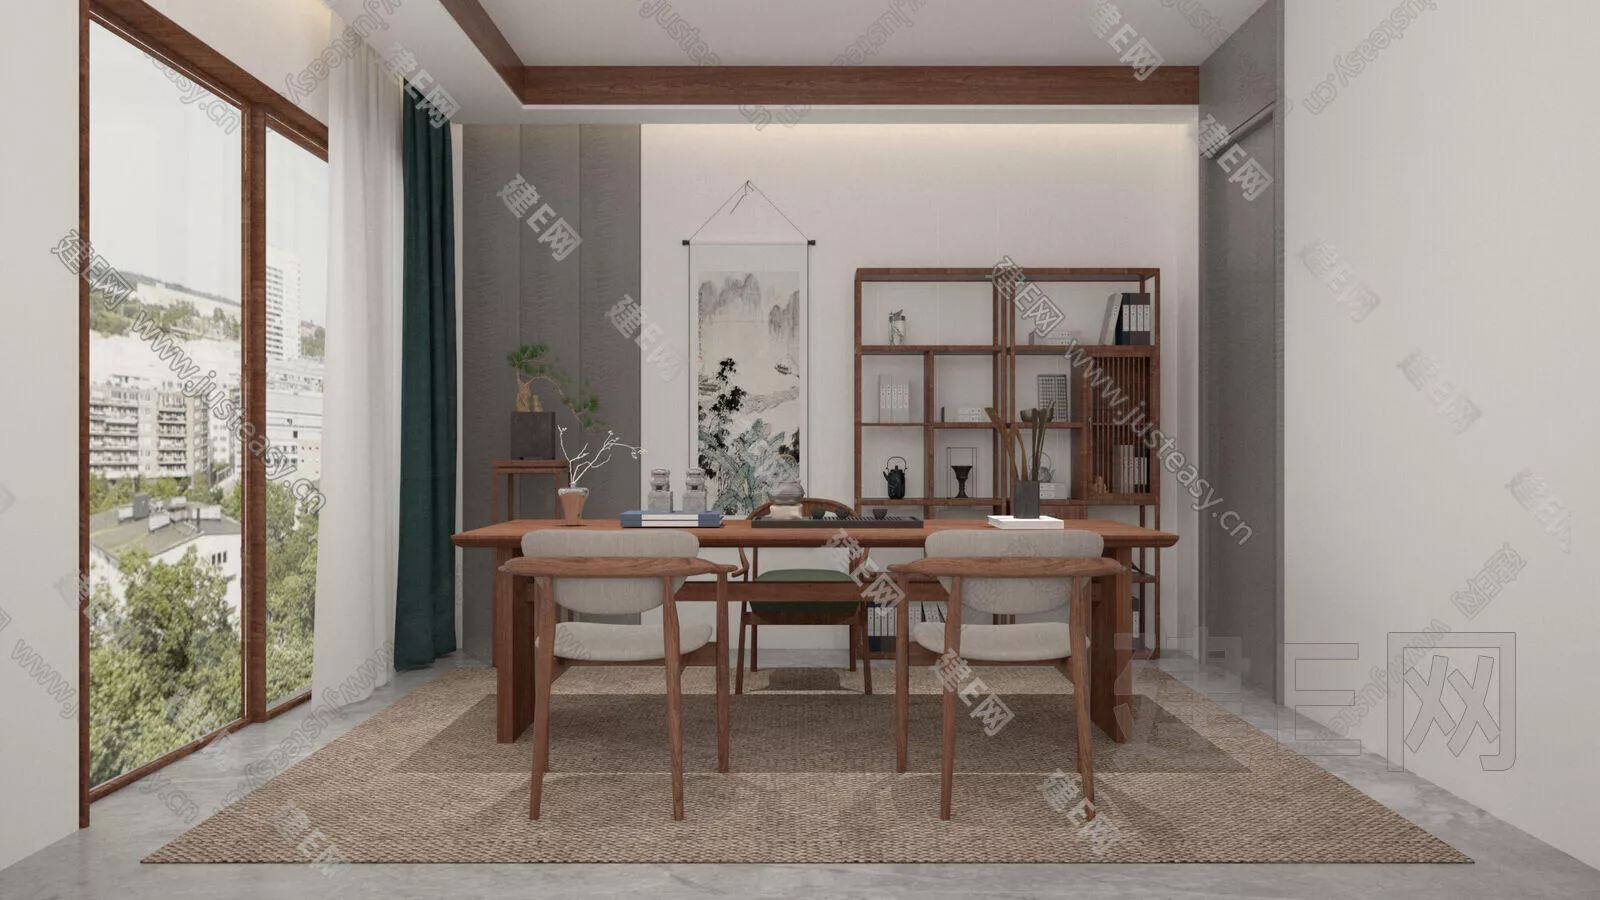 CHINESE STUDY ROOM - SKETCHUP 3D SCENE - ENSCAPE - 105923759